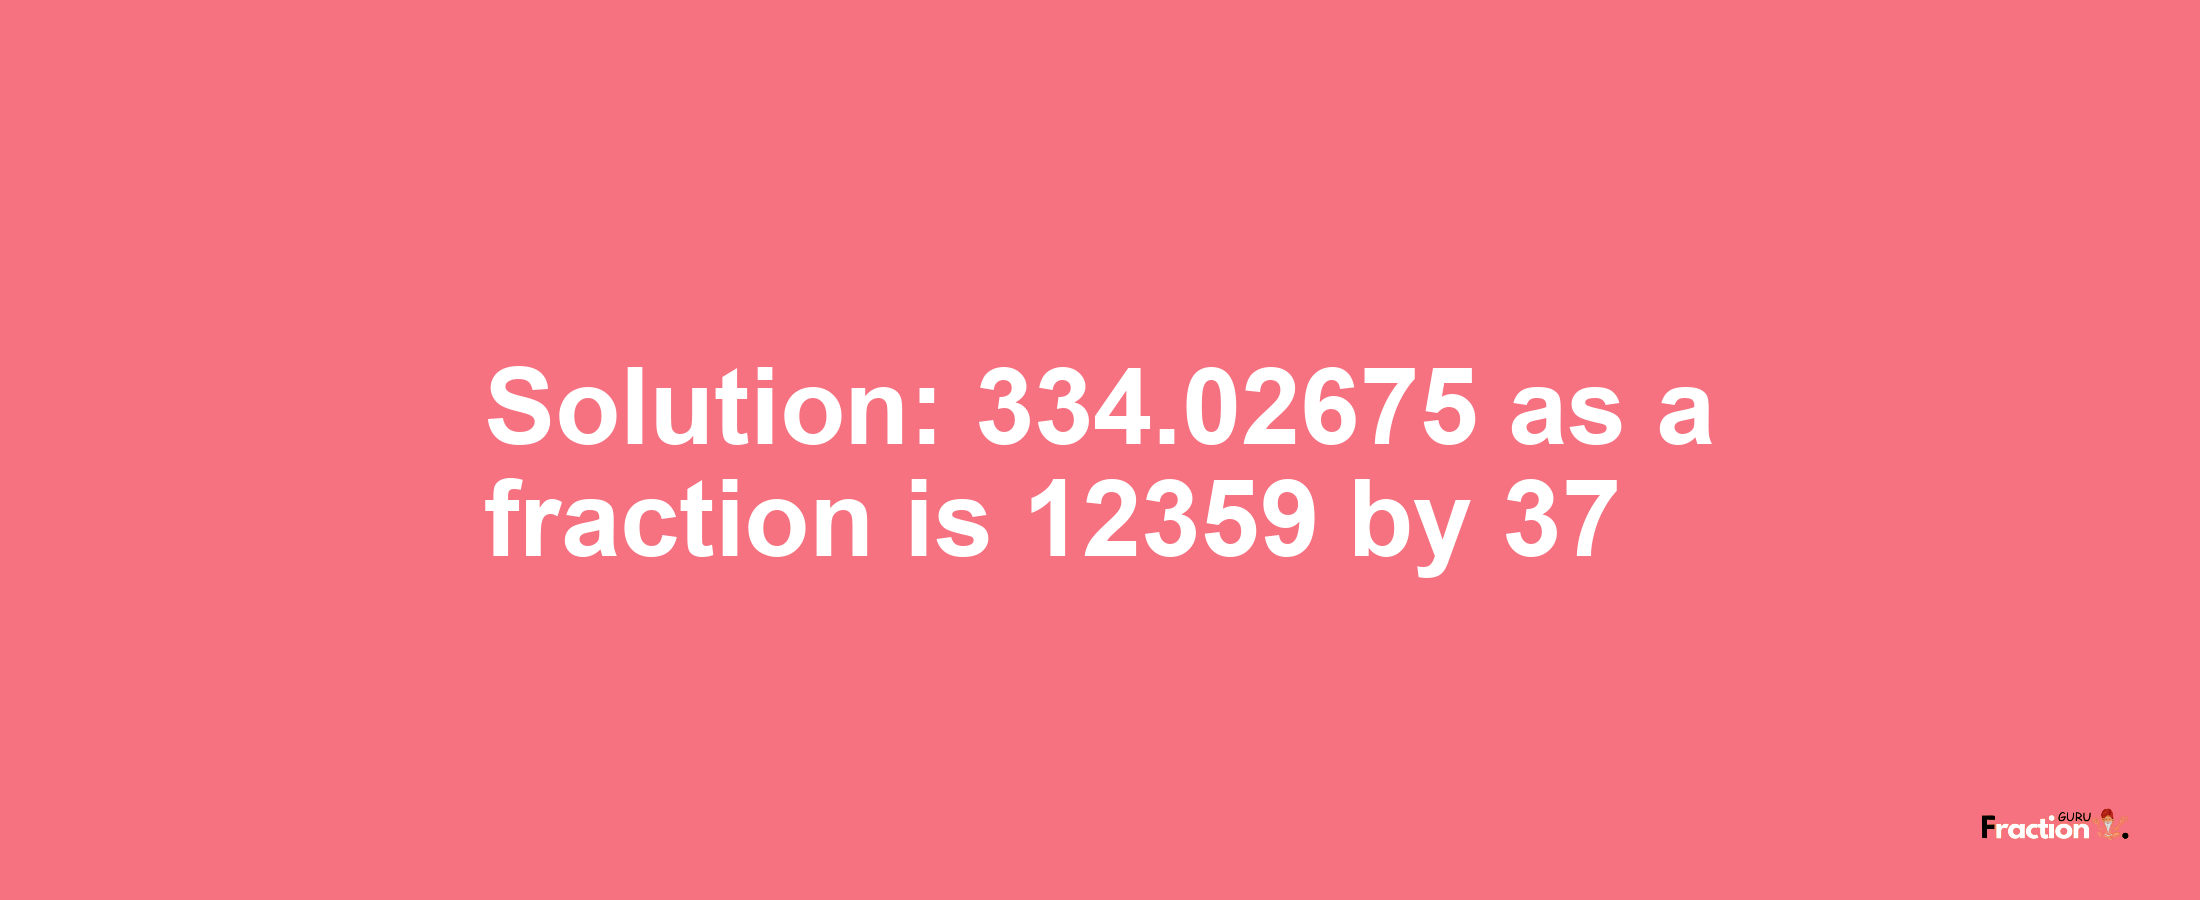 Solution:334.02675 as a fraction is 12359/37